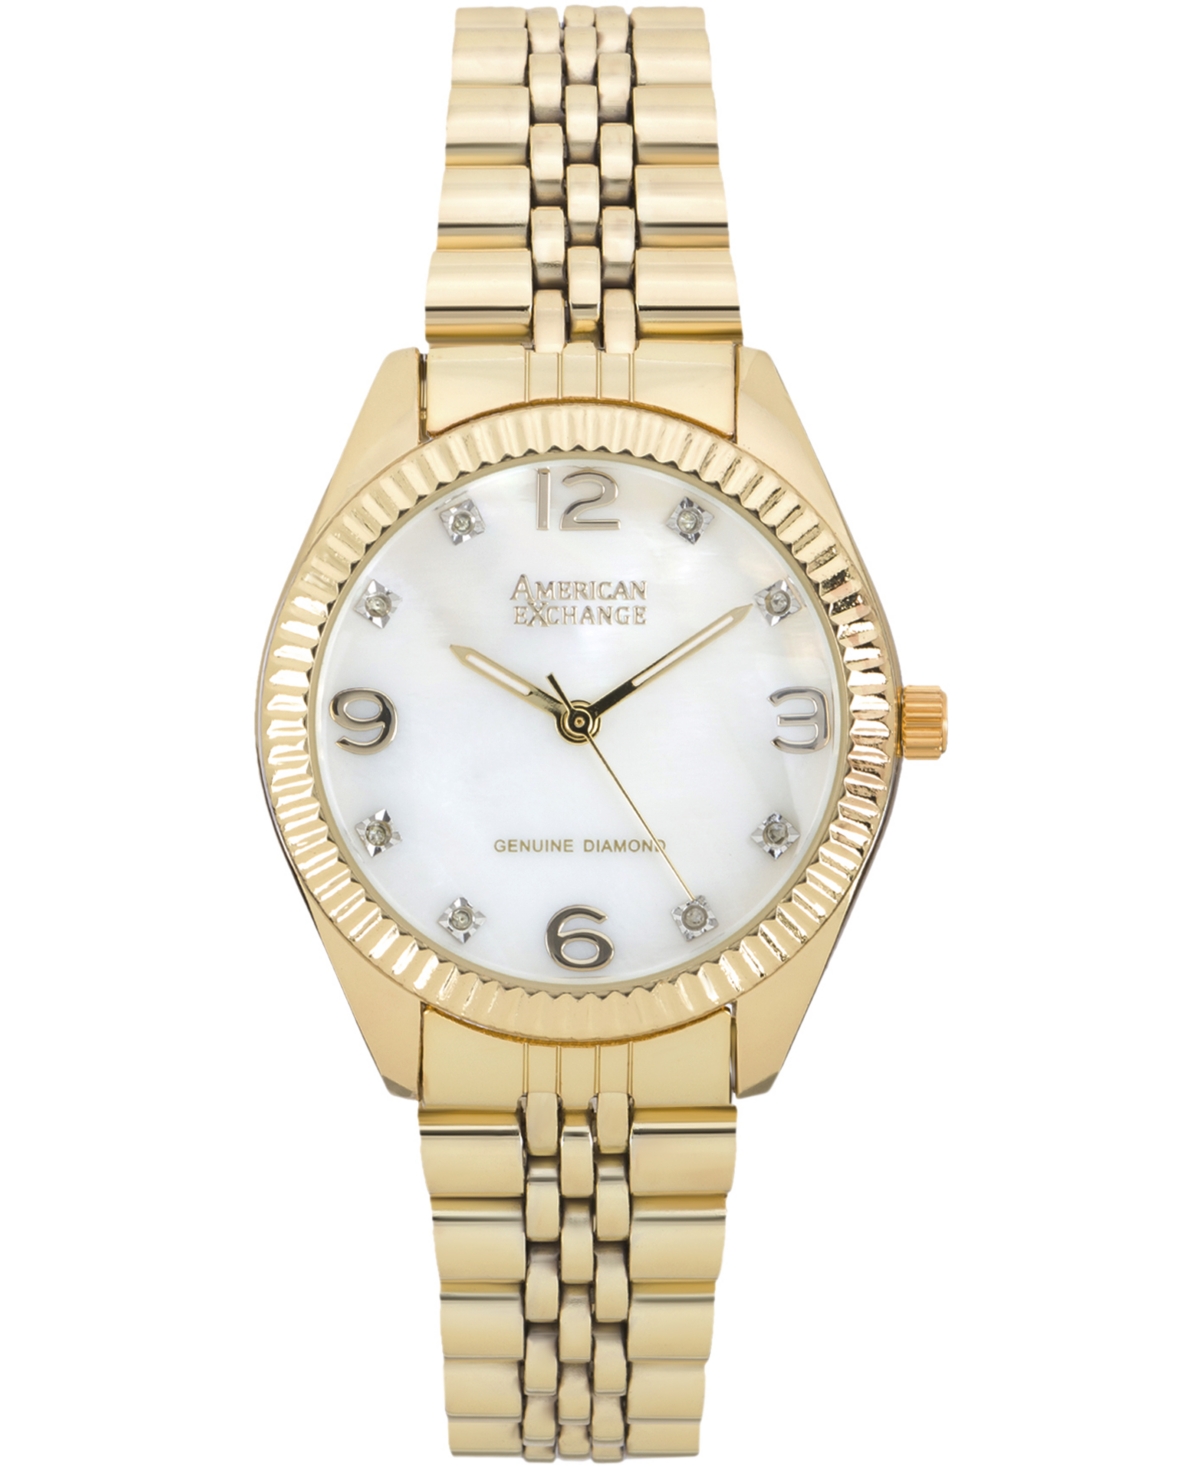 American Exchange Ladies Genuine Diamond Collection Watch, 34mm